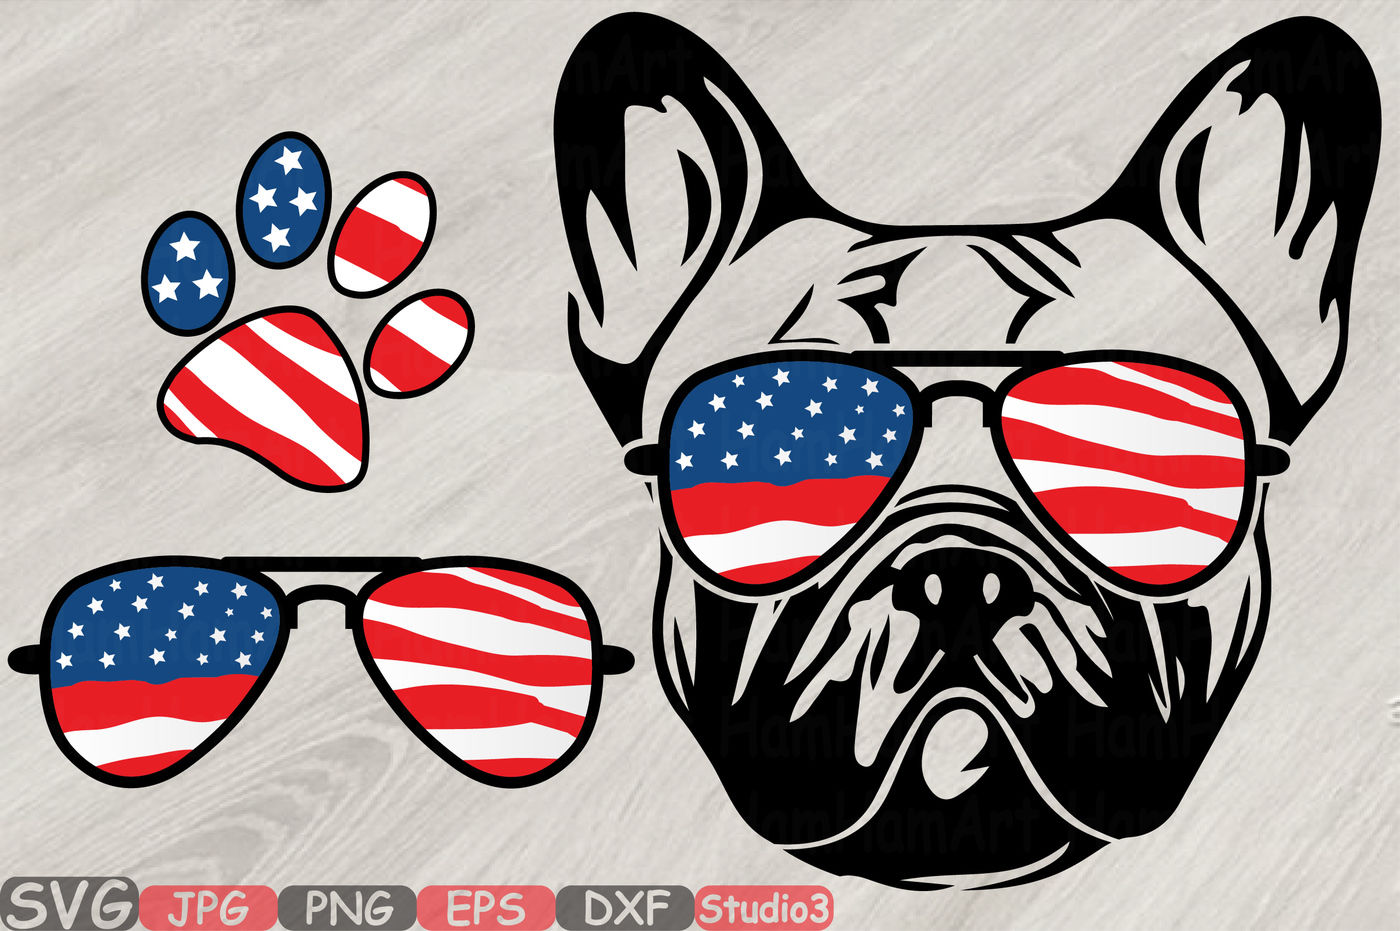 Download Bulldog Usa Flag Glasses Paw Silhouette Svg French Dog 4th Of July 827 By Hamhamart Thehungryjpeg Com